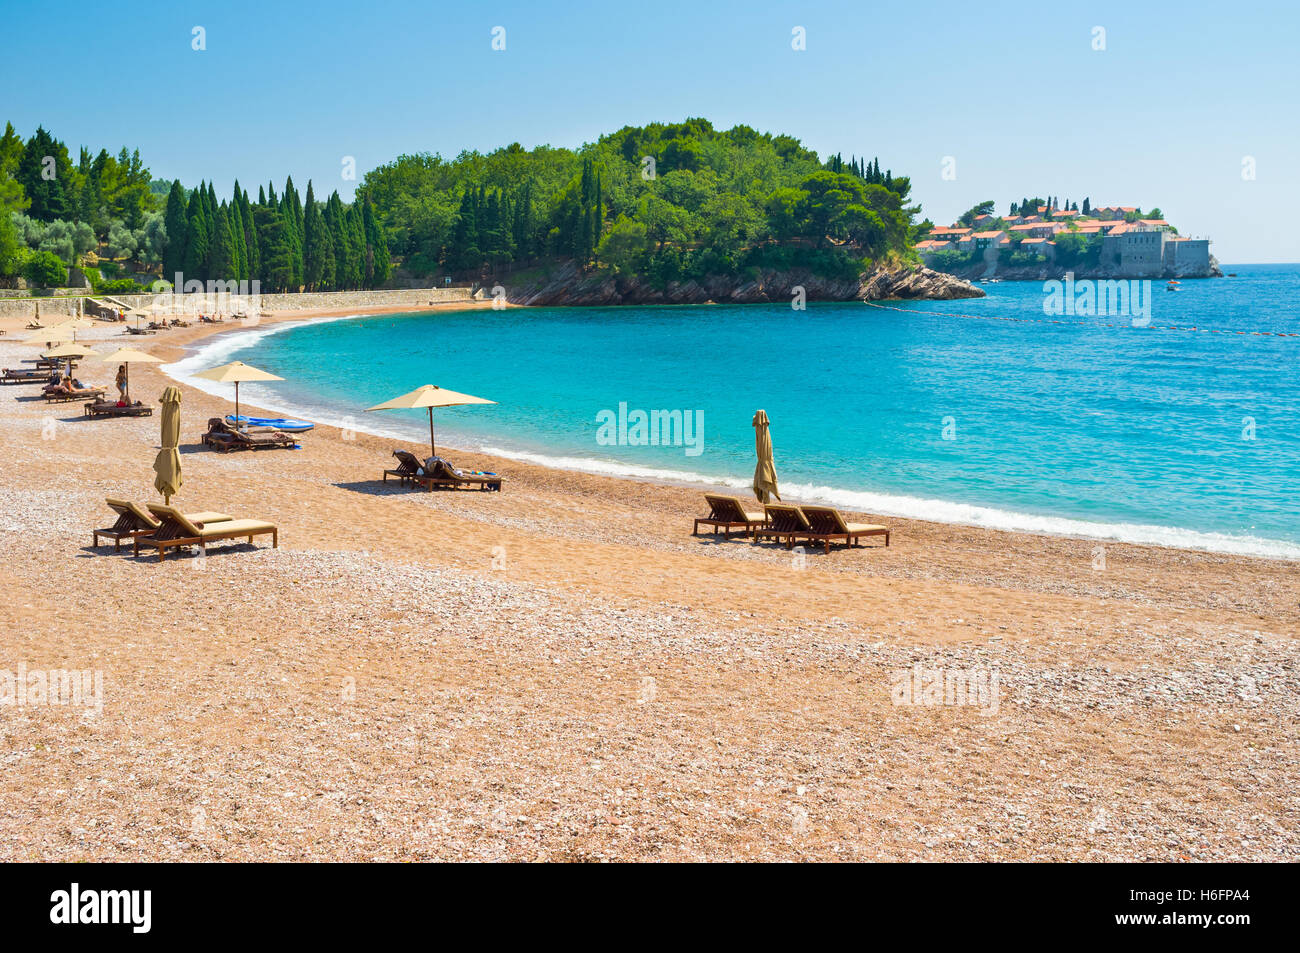 The Queens beach boasts the soft sand calm sea and the perfect view on the Sveti Stefan islet, Montenegro. Stock Photo